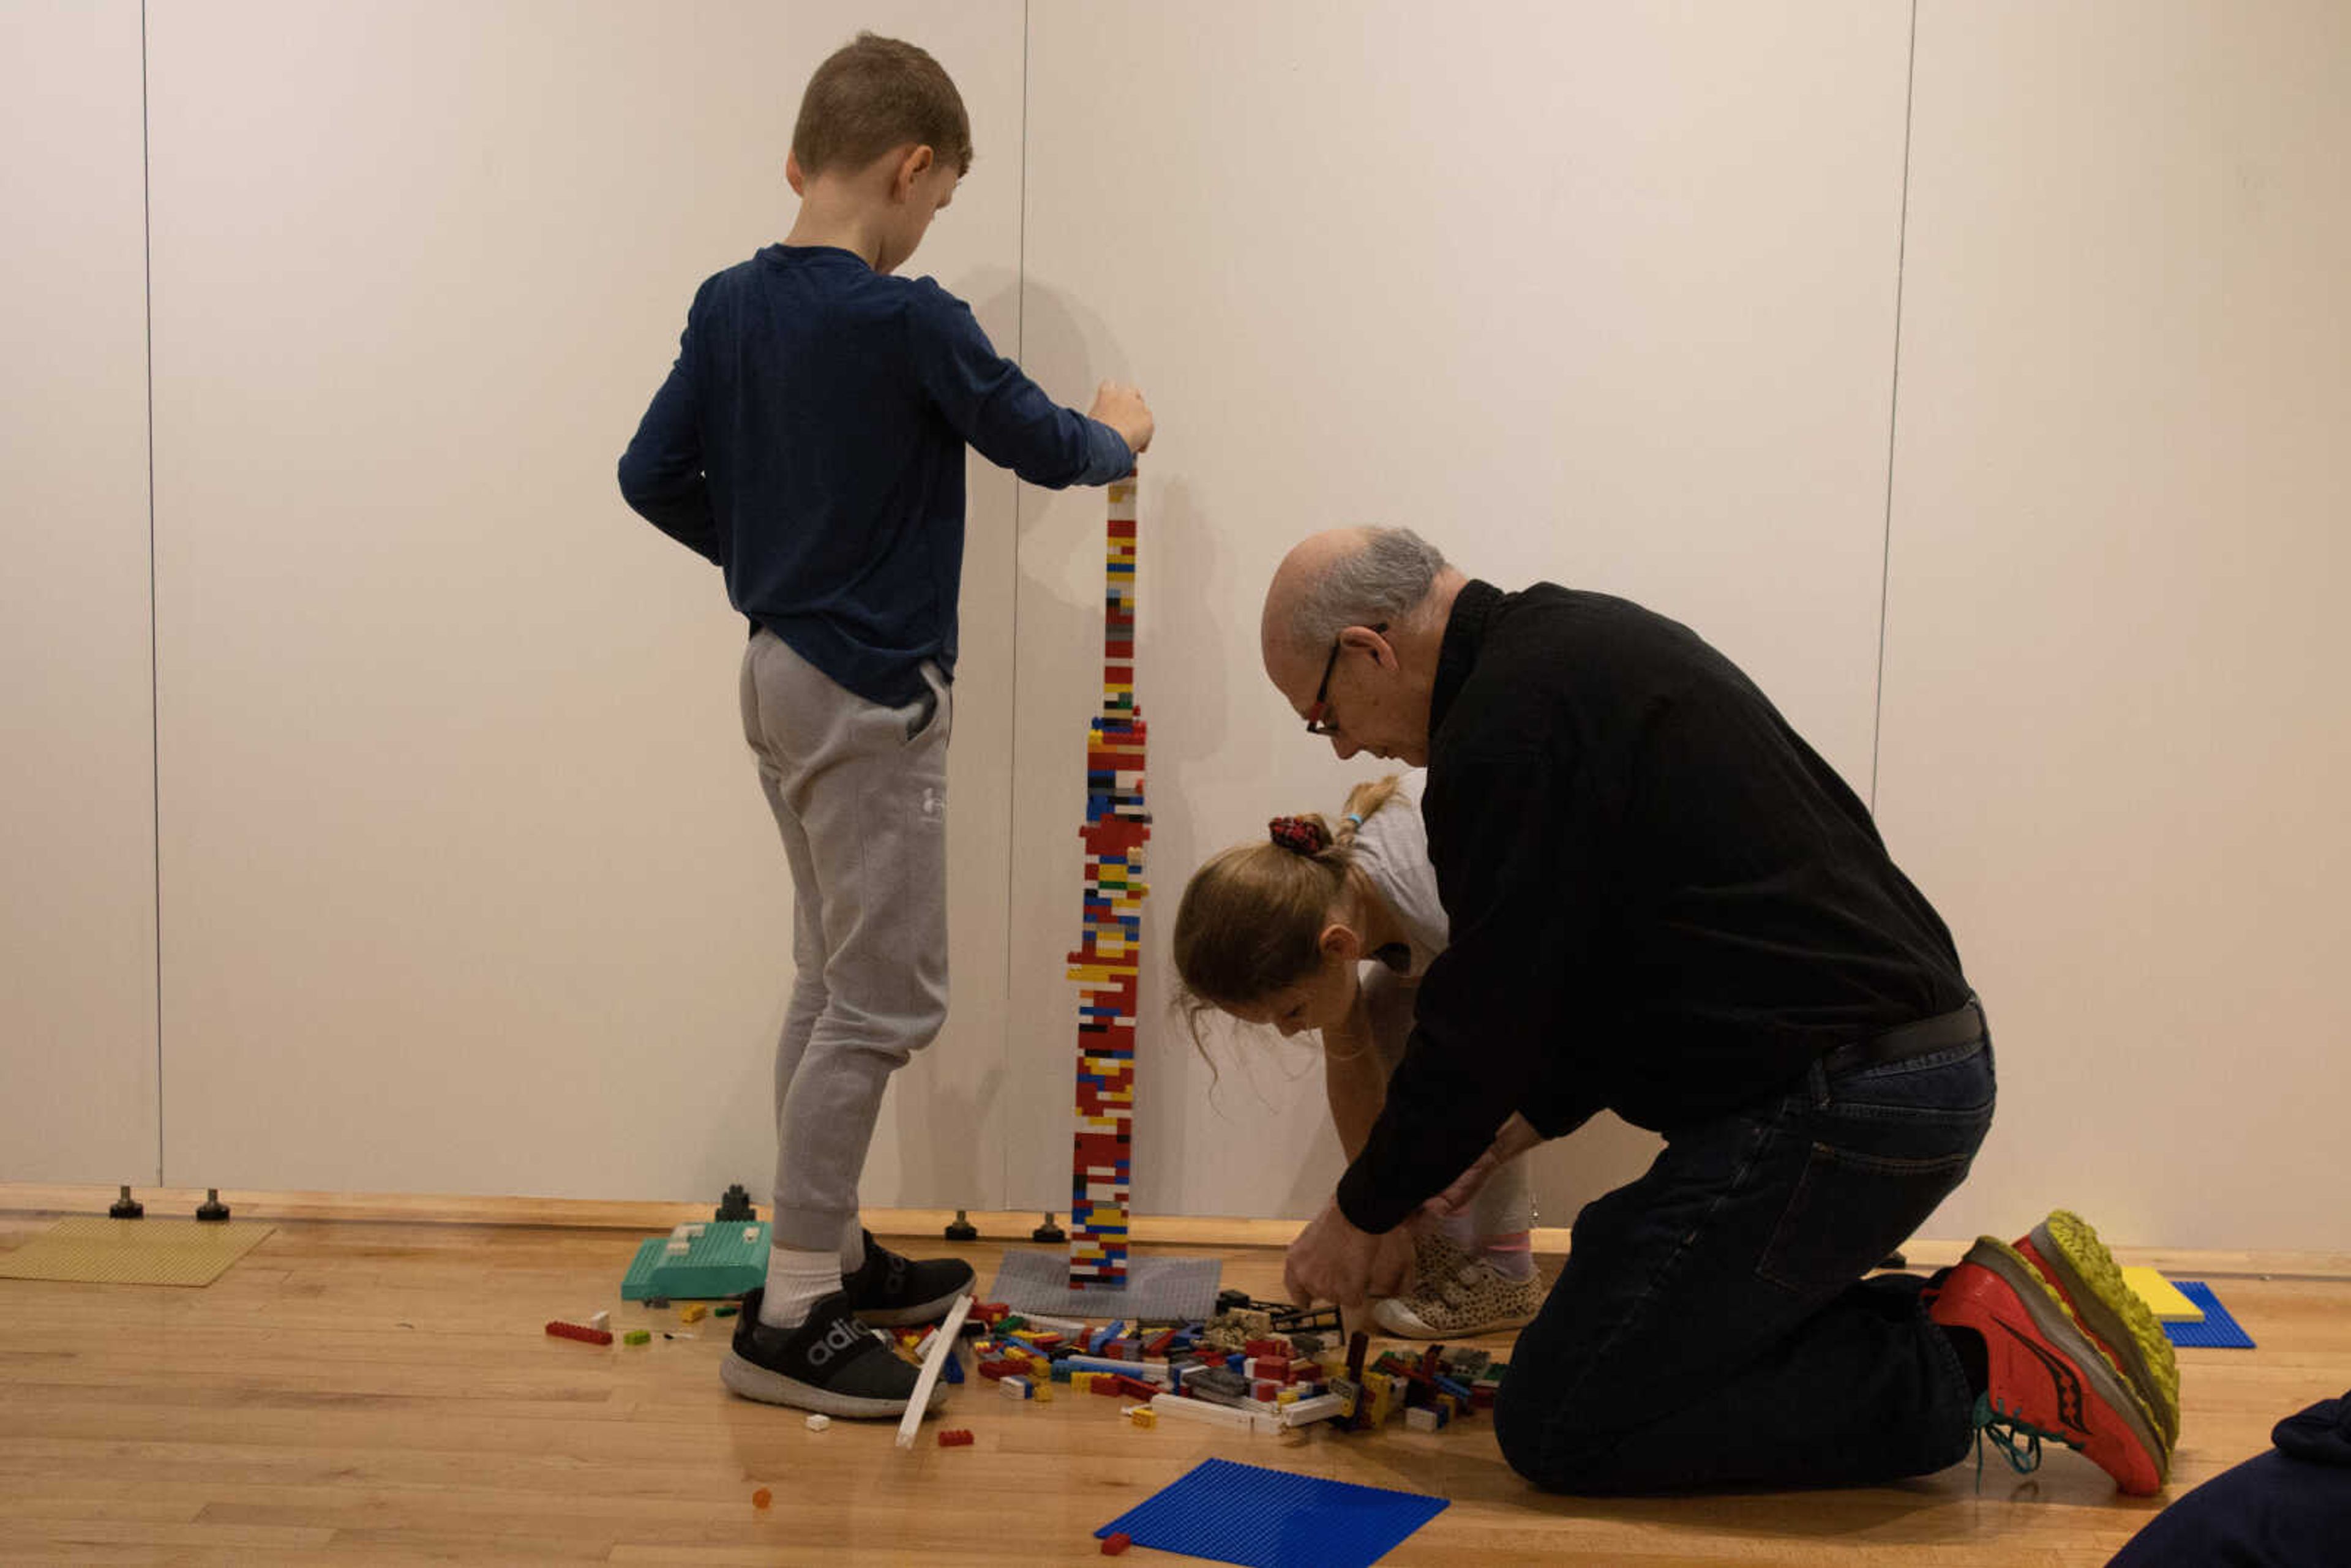 Outreach Specialist Gary Tyler and two children work to build the day one record breaking Lego tower, which stood at 88 inches tall. Their record was beaten on day two with a 92 inch tower built by three SEMO students, Bailee Porteous, Carlee Ashby and and Julia Vogt.